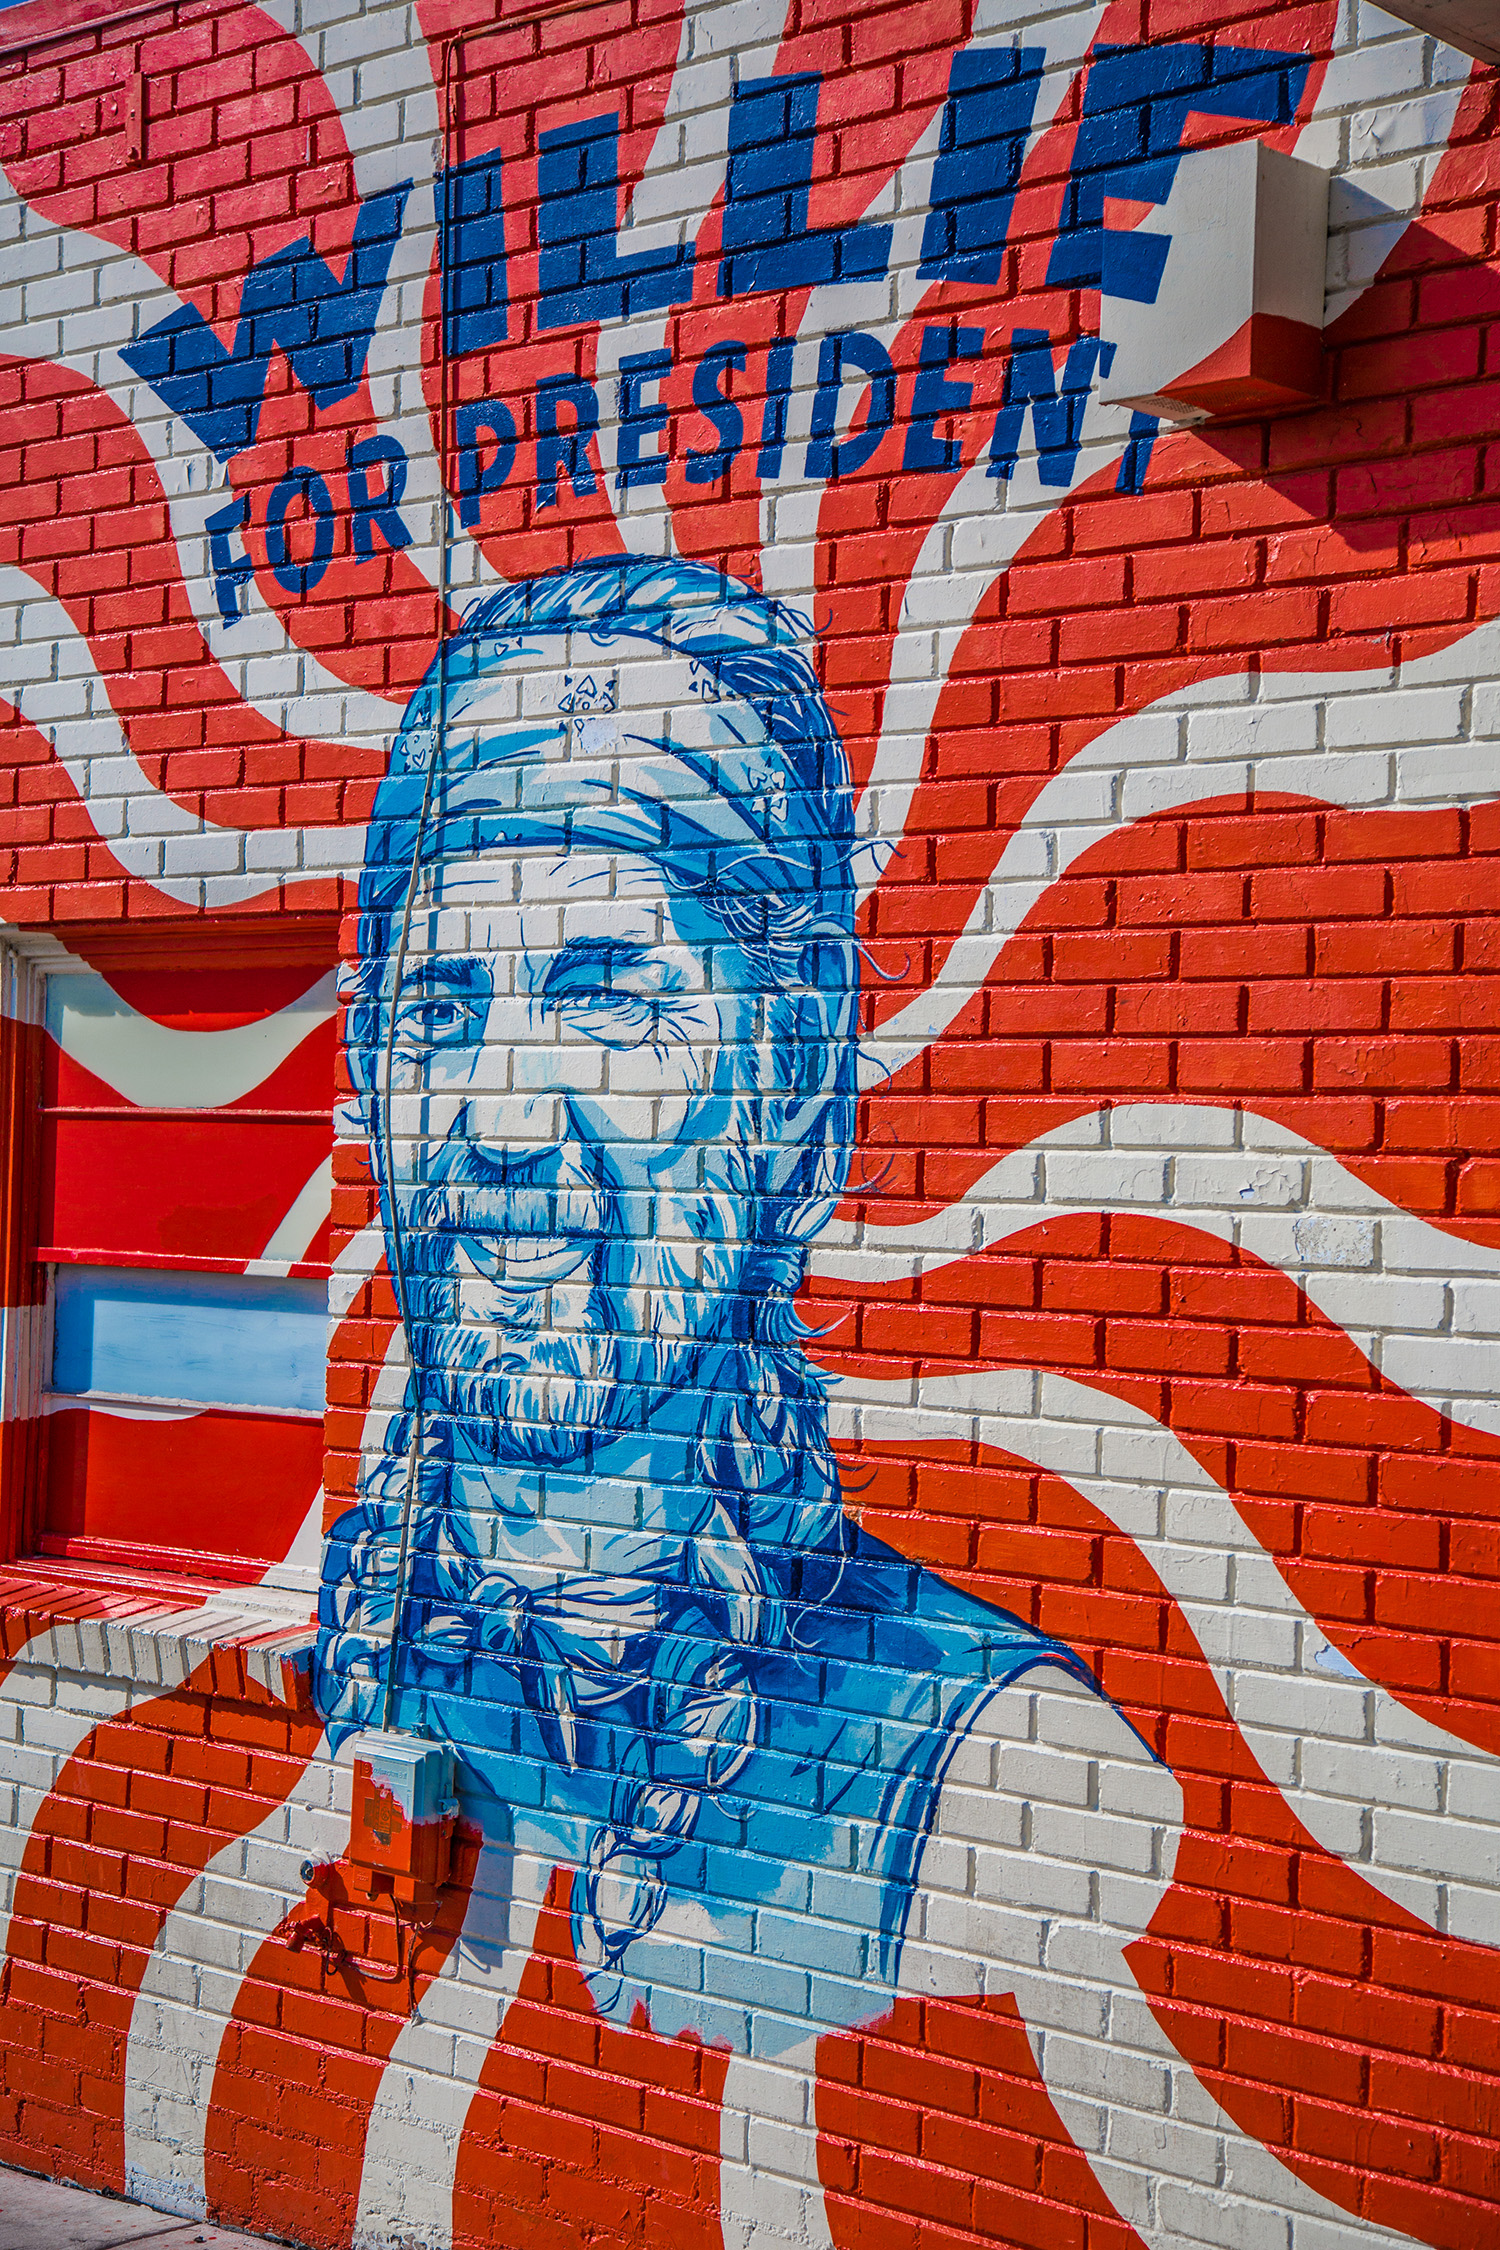 Willie for President Mural on SOuth Congress. Photo : Will Taylor